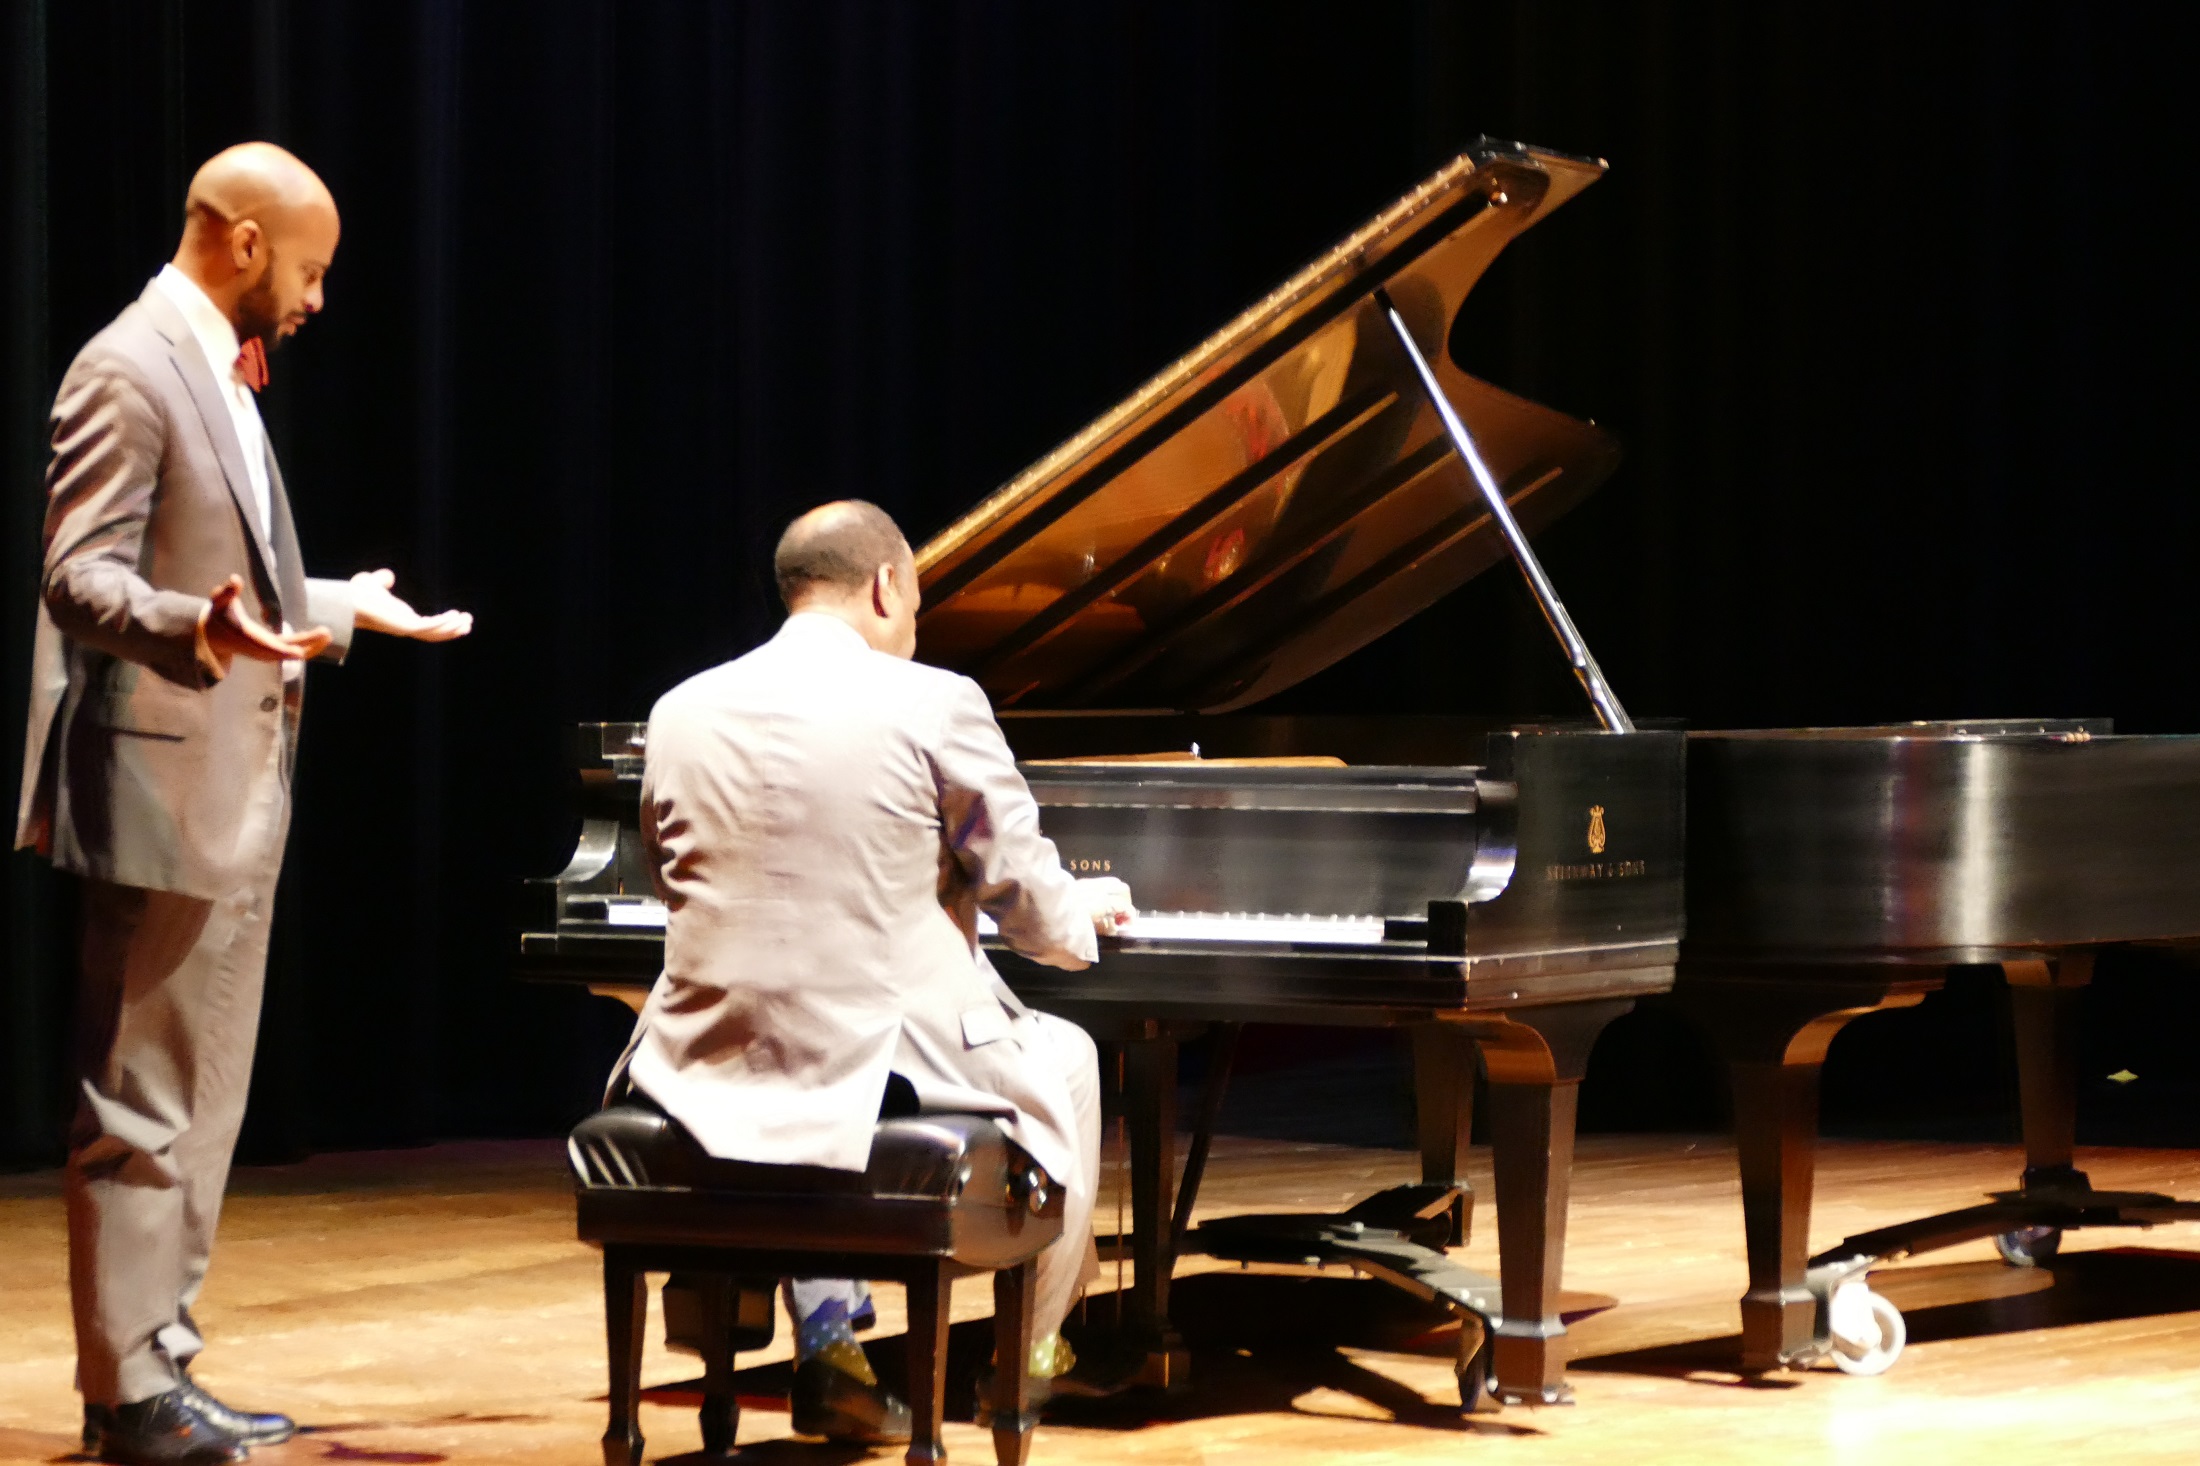 Dueling+Father-Son+Piano+Duo+Play+to+Inspire